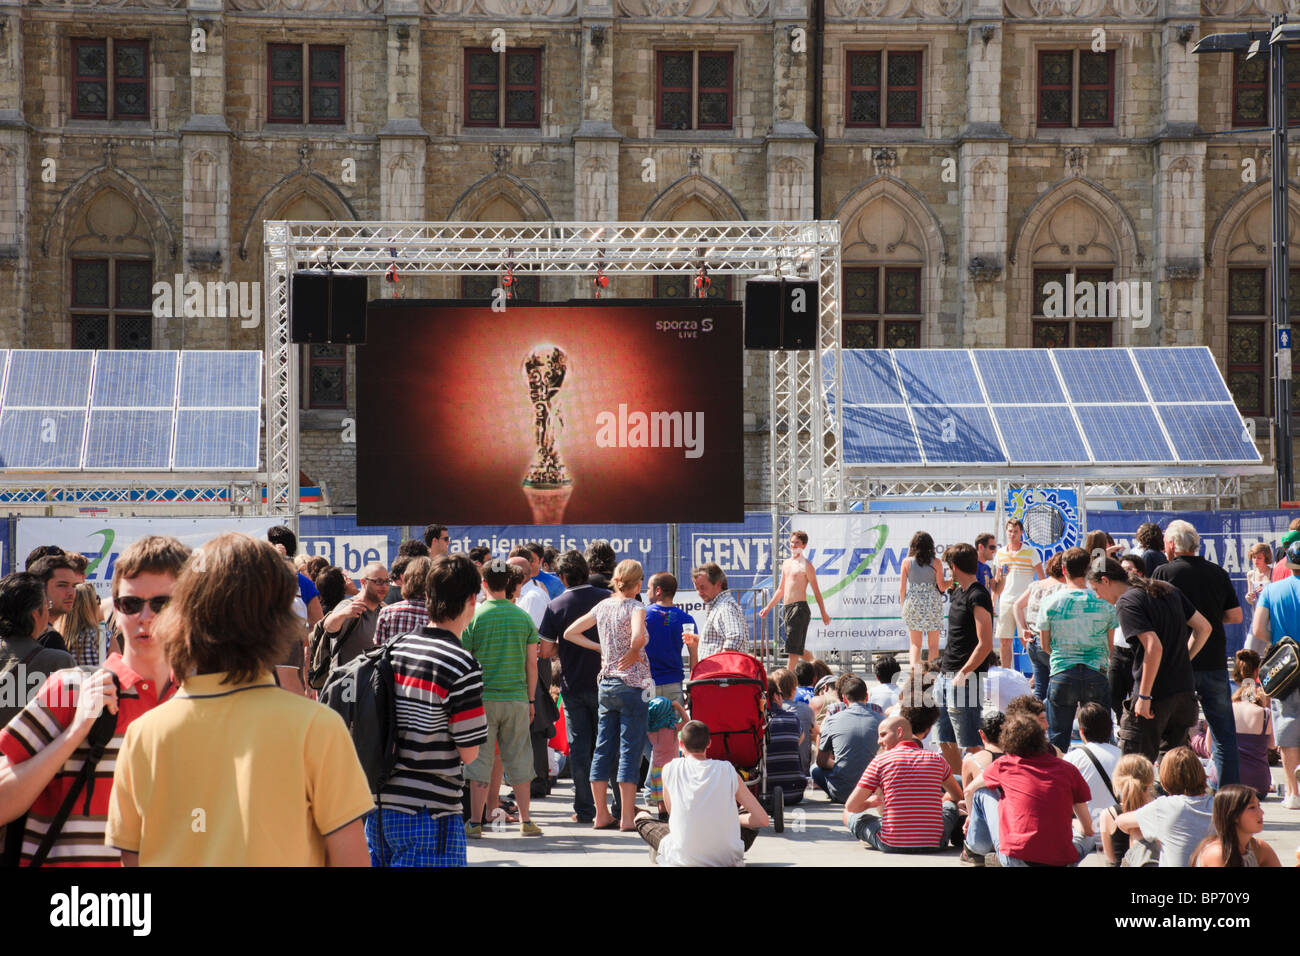 Crowd of people watching World Cup live football match on big screen solar powered television. Sint-Baafs Plein, Ghent, Belgium. Stock Photo